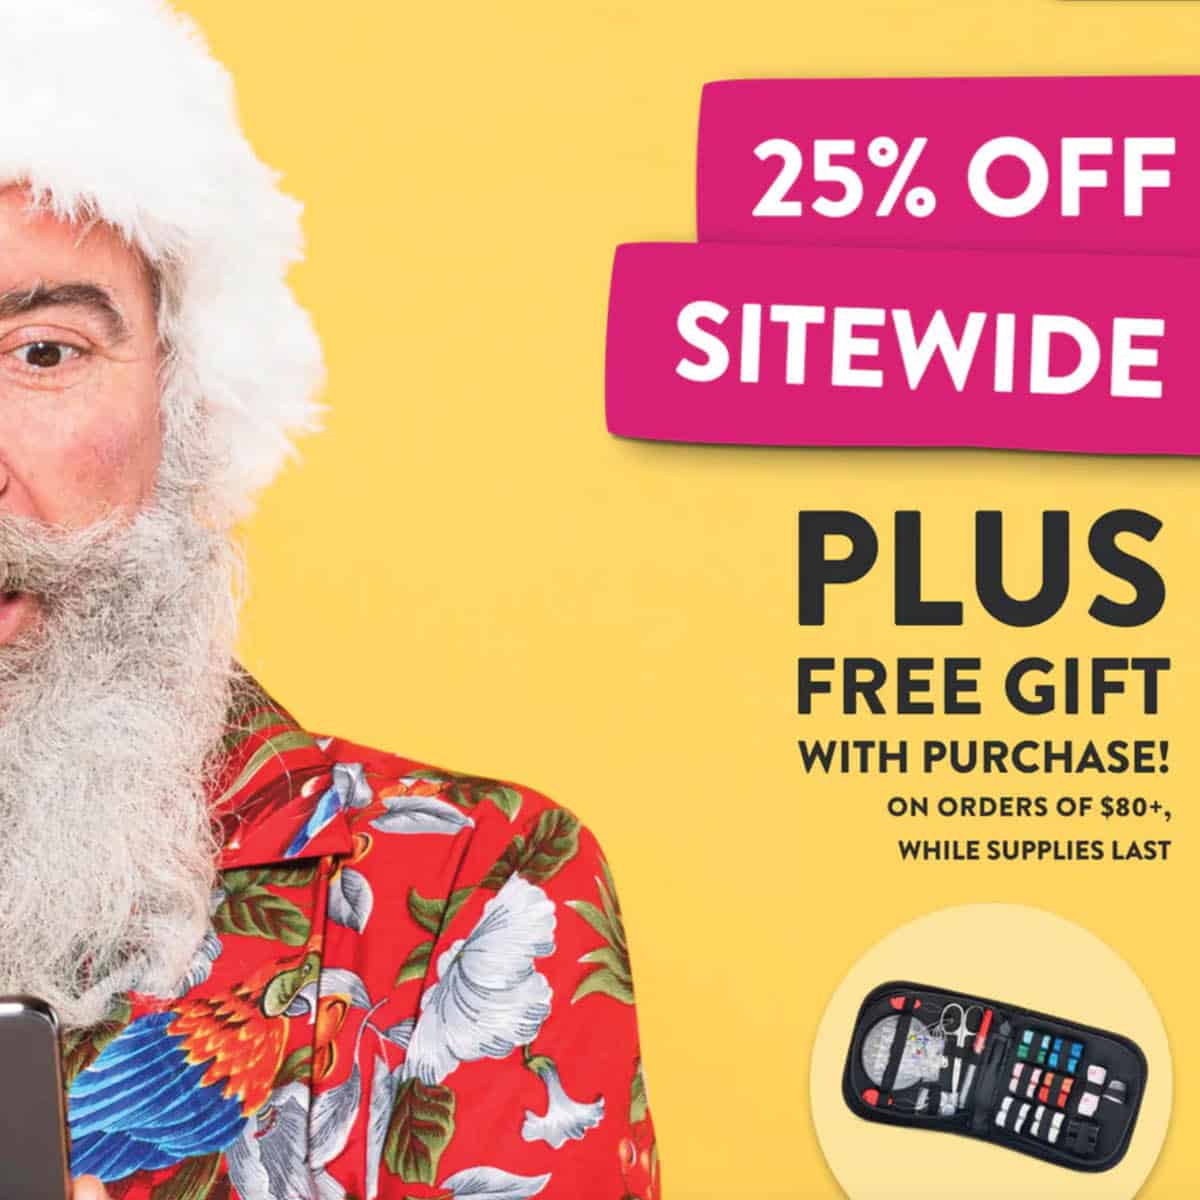 Santa is Cleaning the Yarn Warehouse with 25% off and More